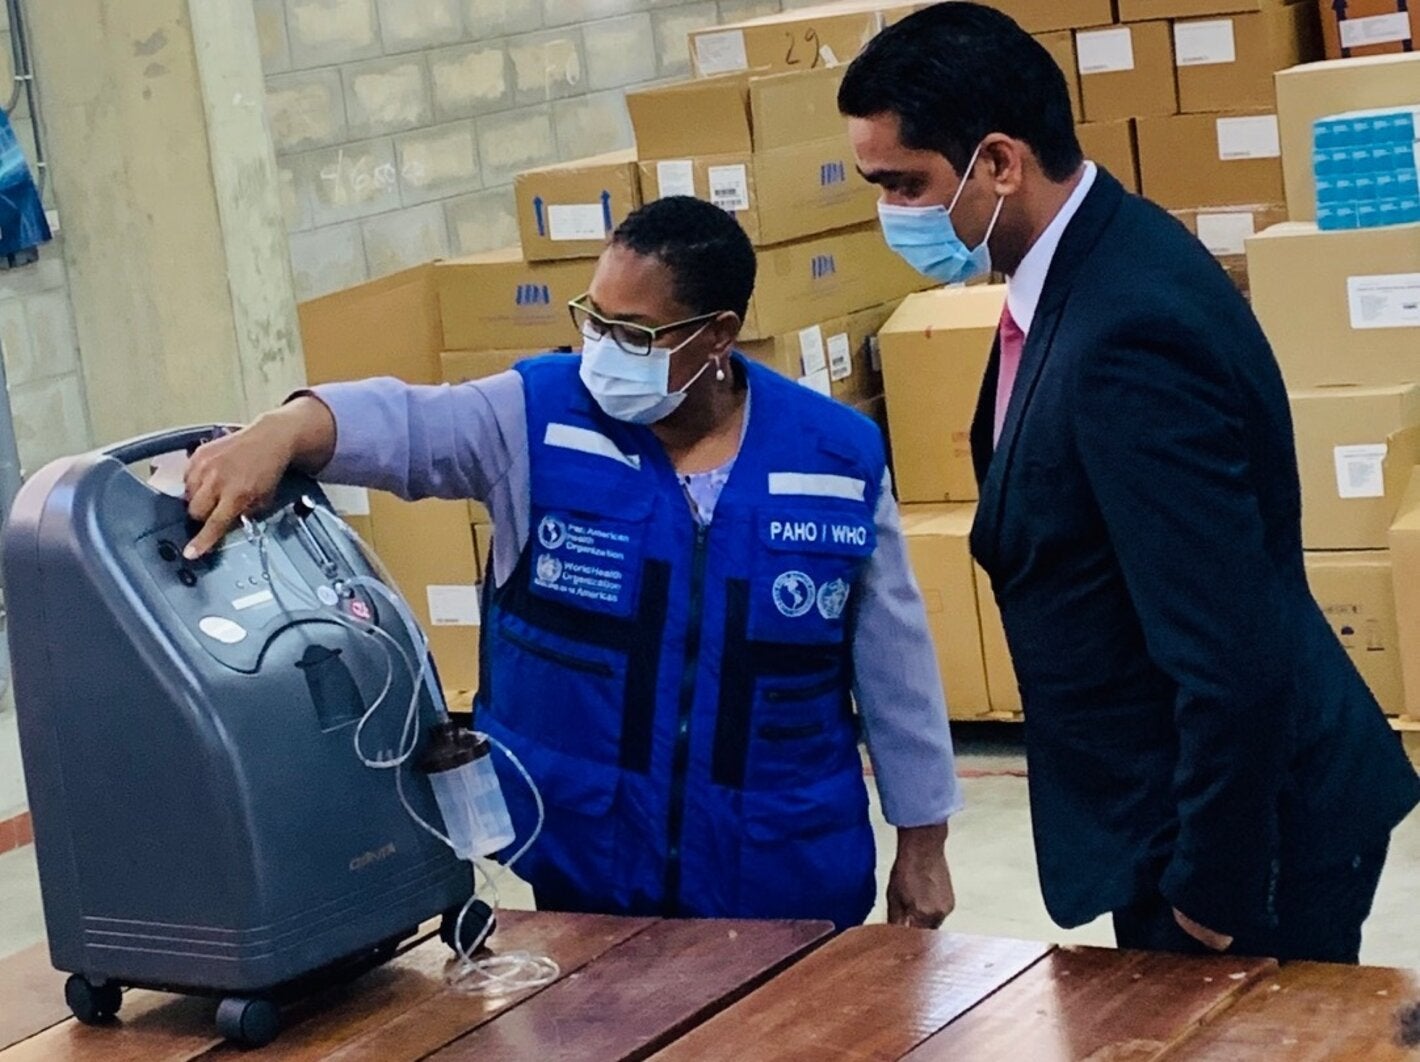 PAHO/WHO Representative for Suriname, Dr. Karen Lewis-Bell officially hands-over 20 oxygen concentrators to Dr. Amar Ramadhin, Minister of Health.